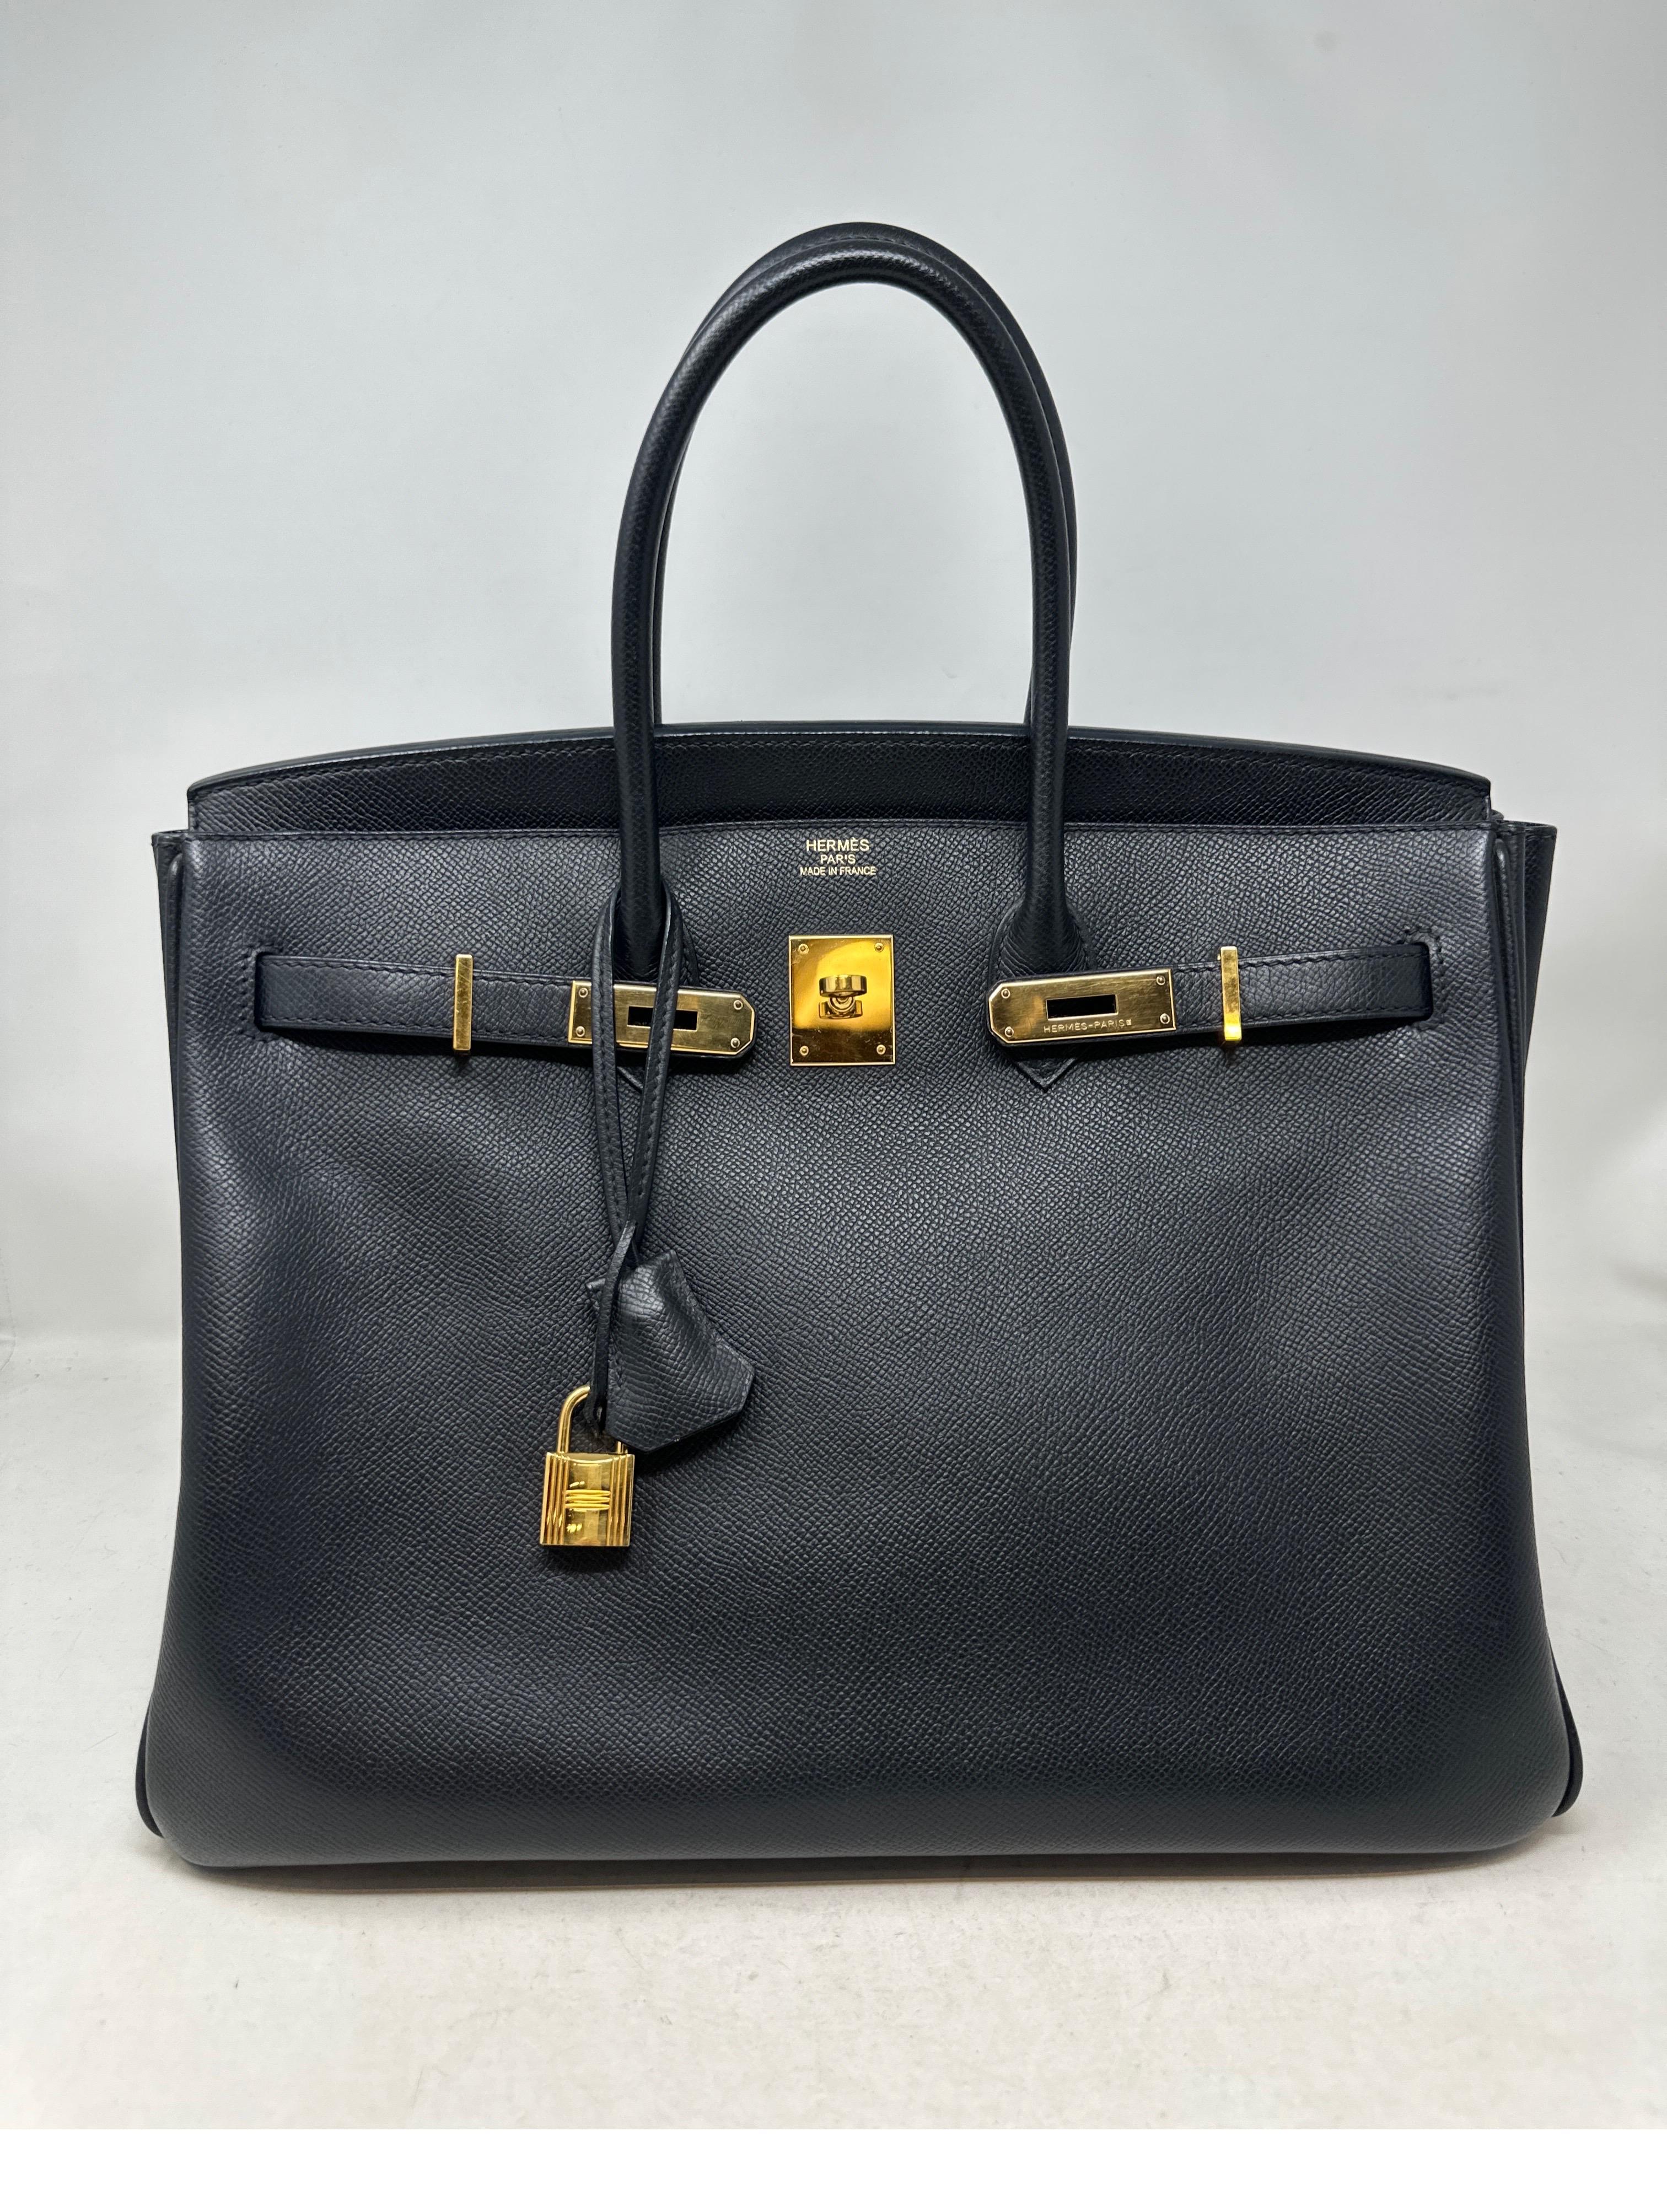 Hermes Black Birkin 35 Bag. Epsom leather. Excellent like new condition. Gold hardware. Interior clean. Includes clochette, lock, keys, and dust bag. Guaranteed authentic. Beautiful classic black bag. Investment piece. 